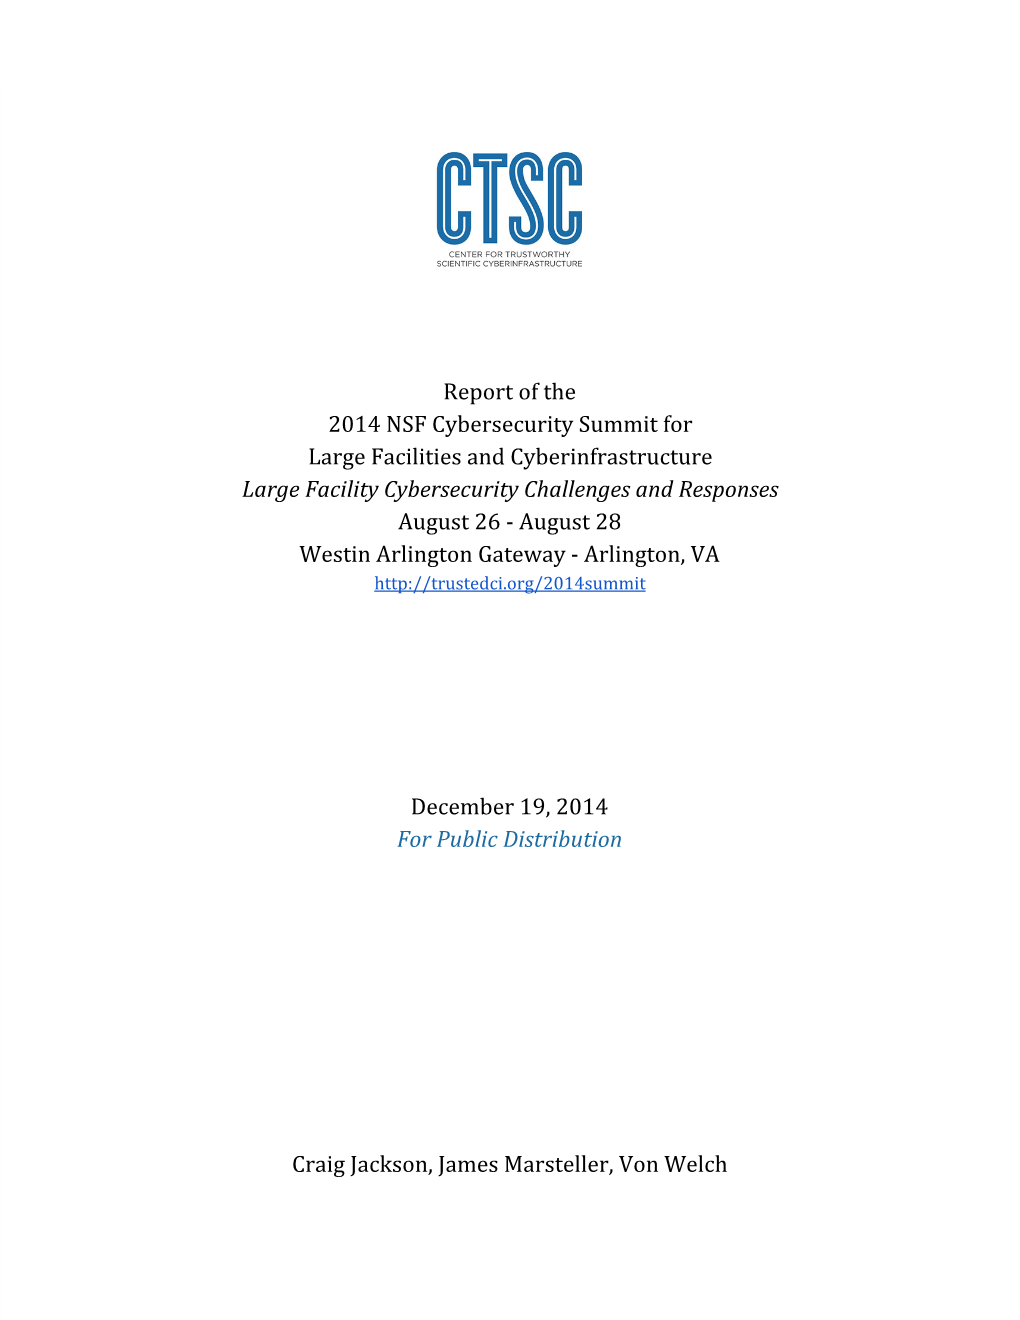 Report of the 2014 NSF Cybersecurity Summit for Large Facilities and Cyberinfrastructure Large Facility Cyber